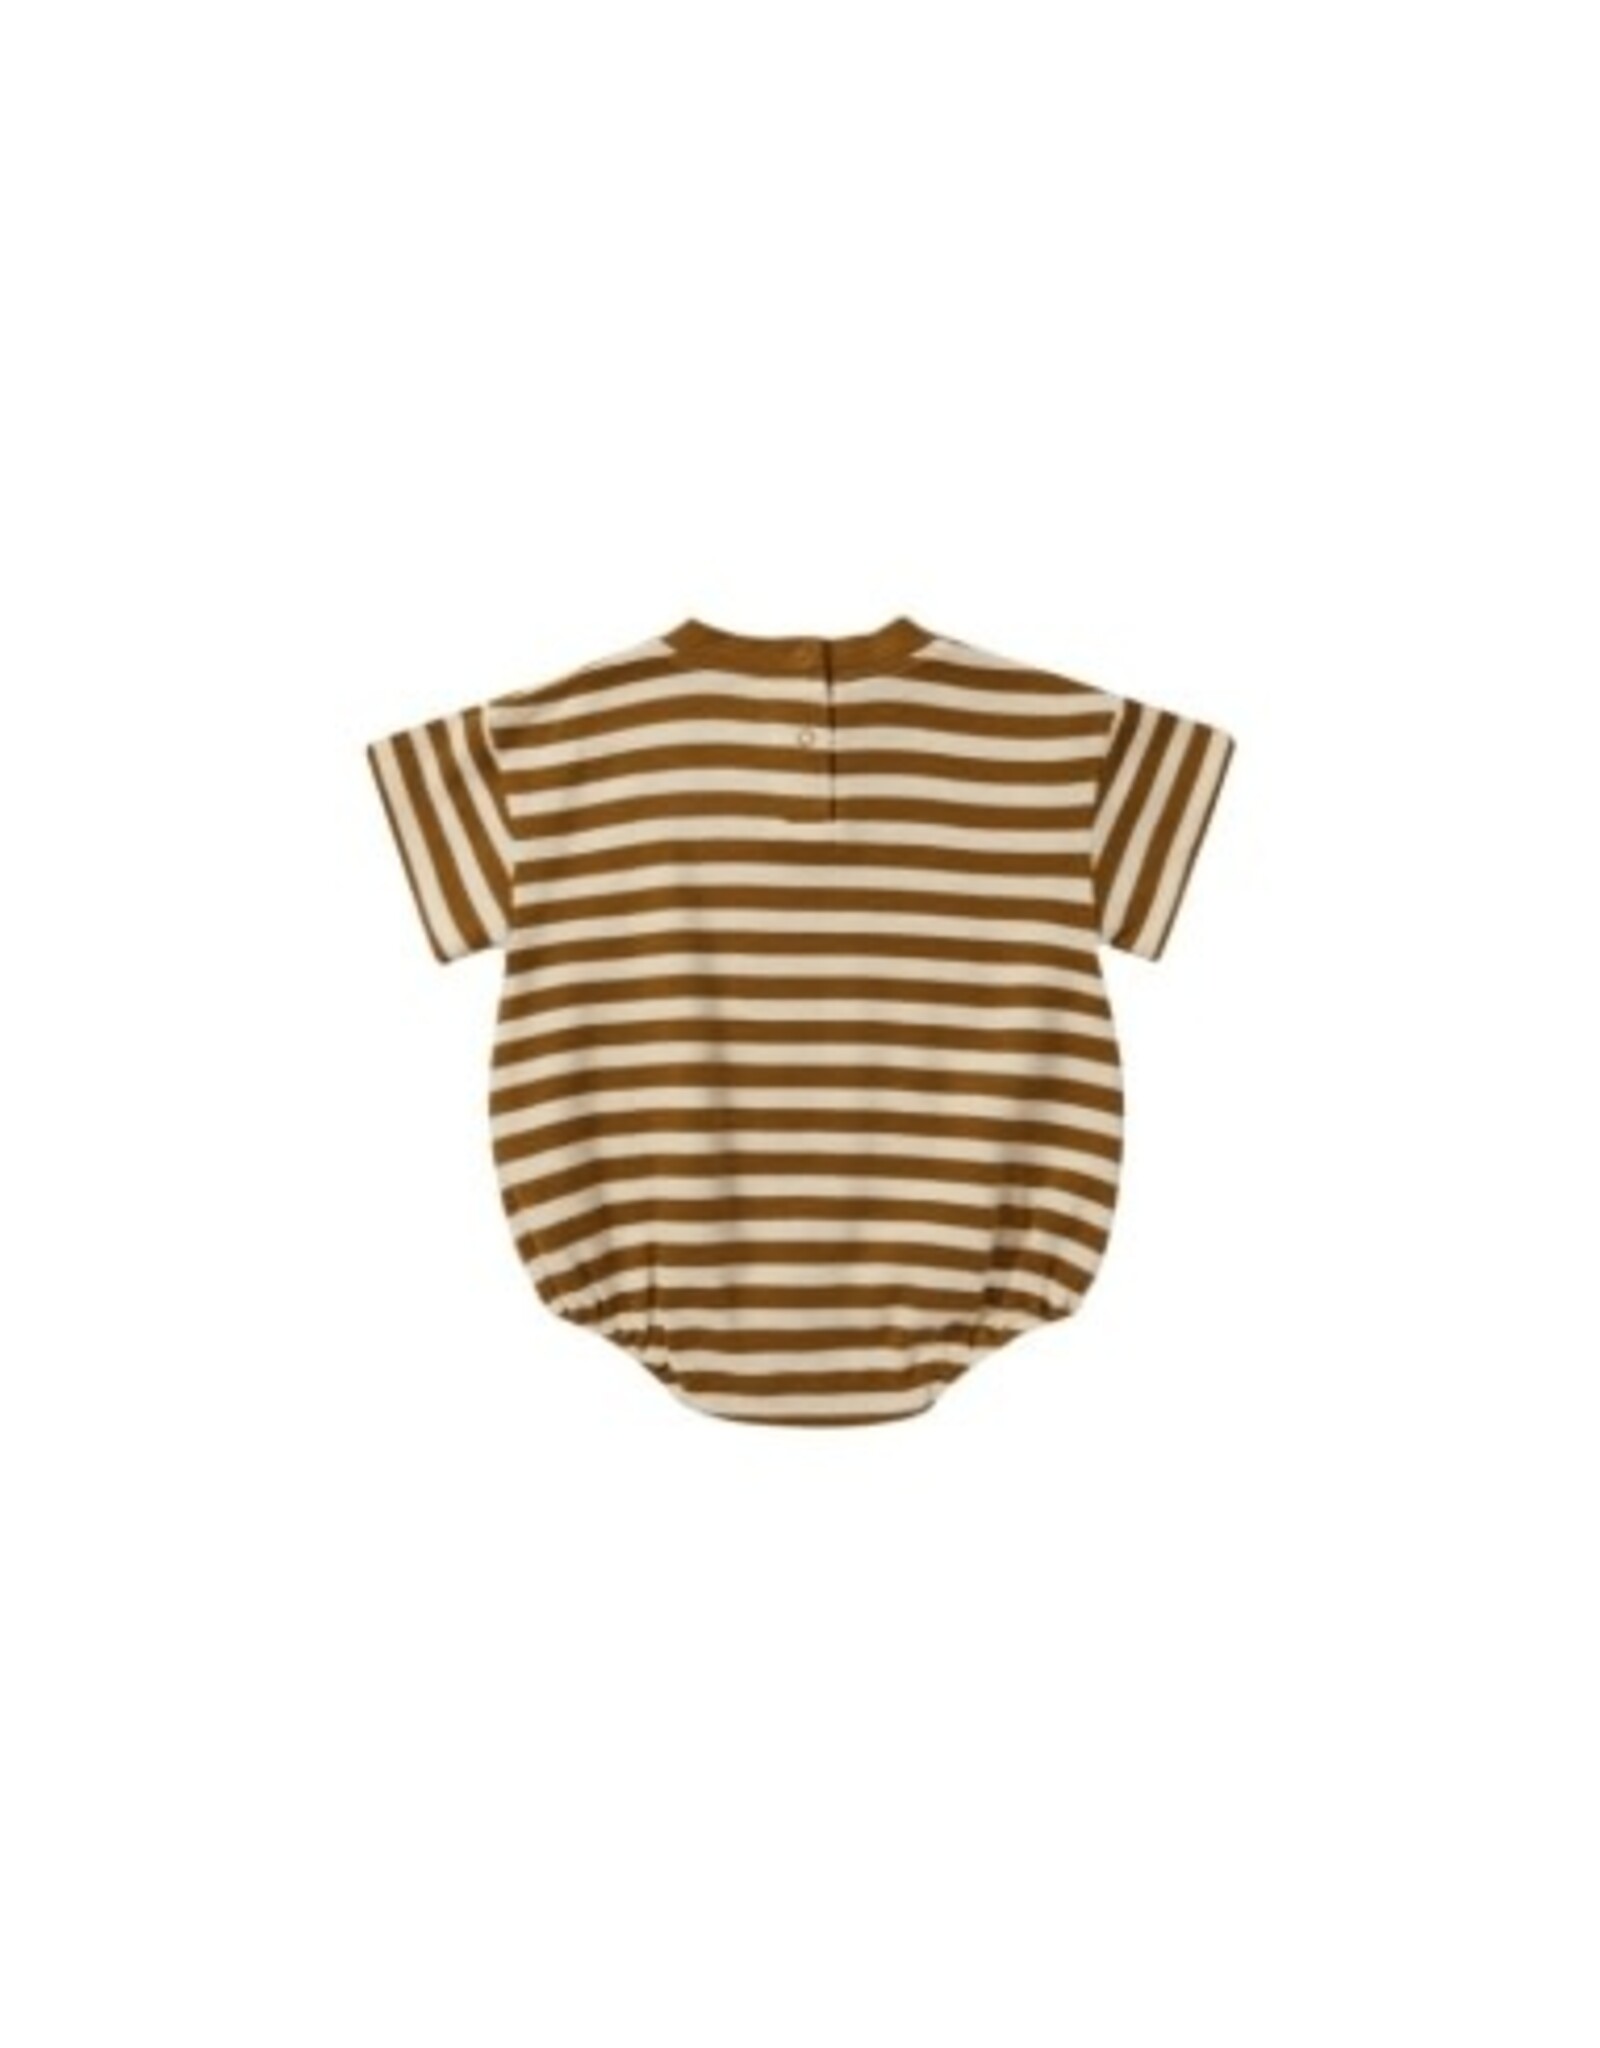 Rylee + Cru Inc. RELAXED BUBBLE ROMPER || SADDLE STRIPE